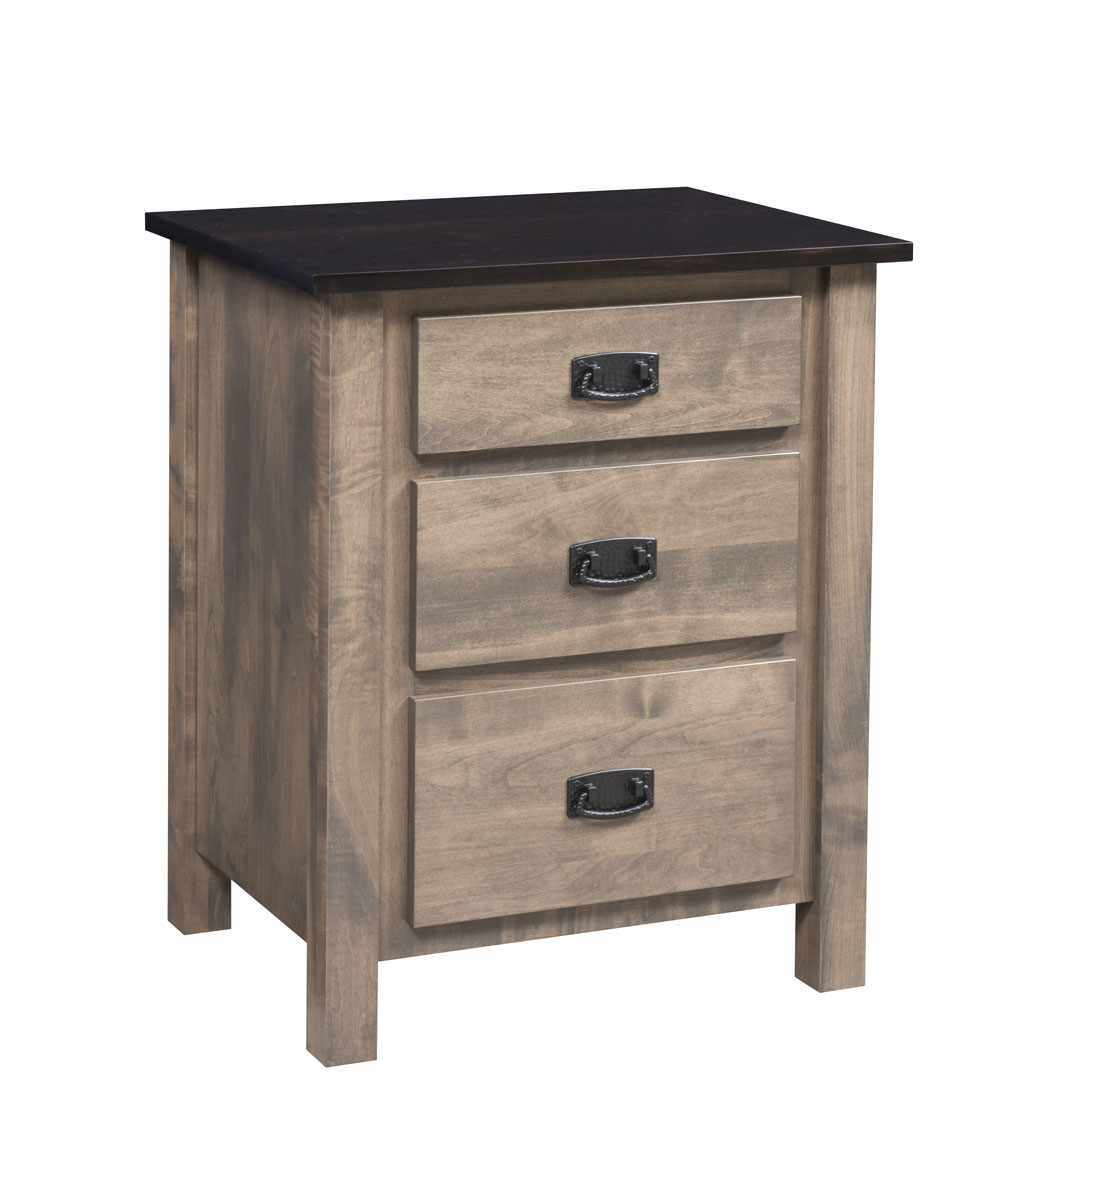 Dutch Country Mission 3 Drawer Nightstand in Brown Maple with a Top Finished in Ebony and the Bottom Finished in Cabinet Smoke